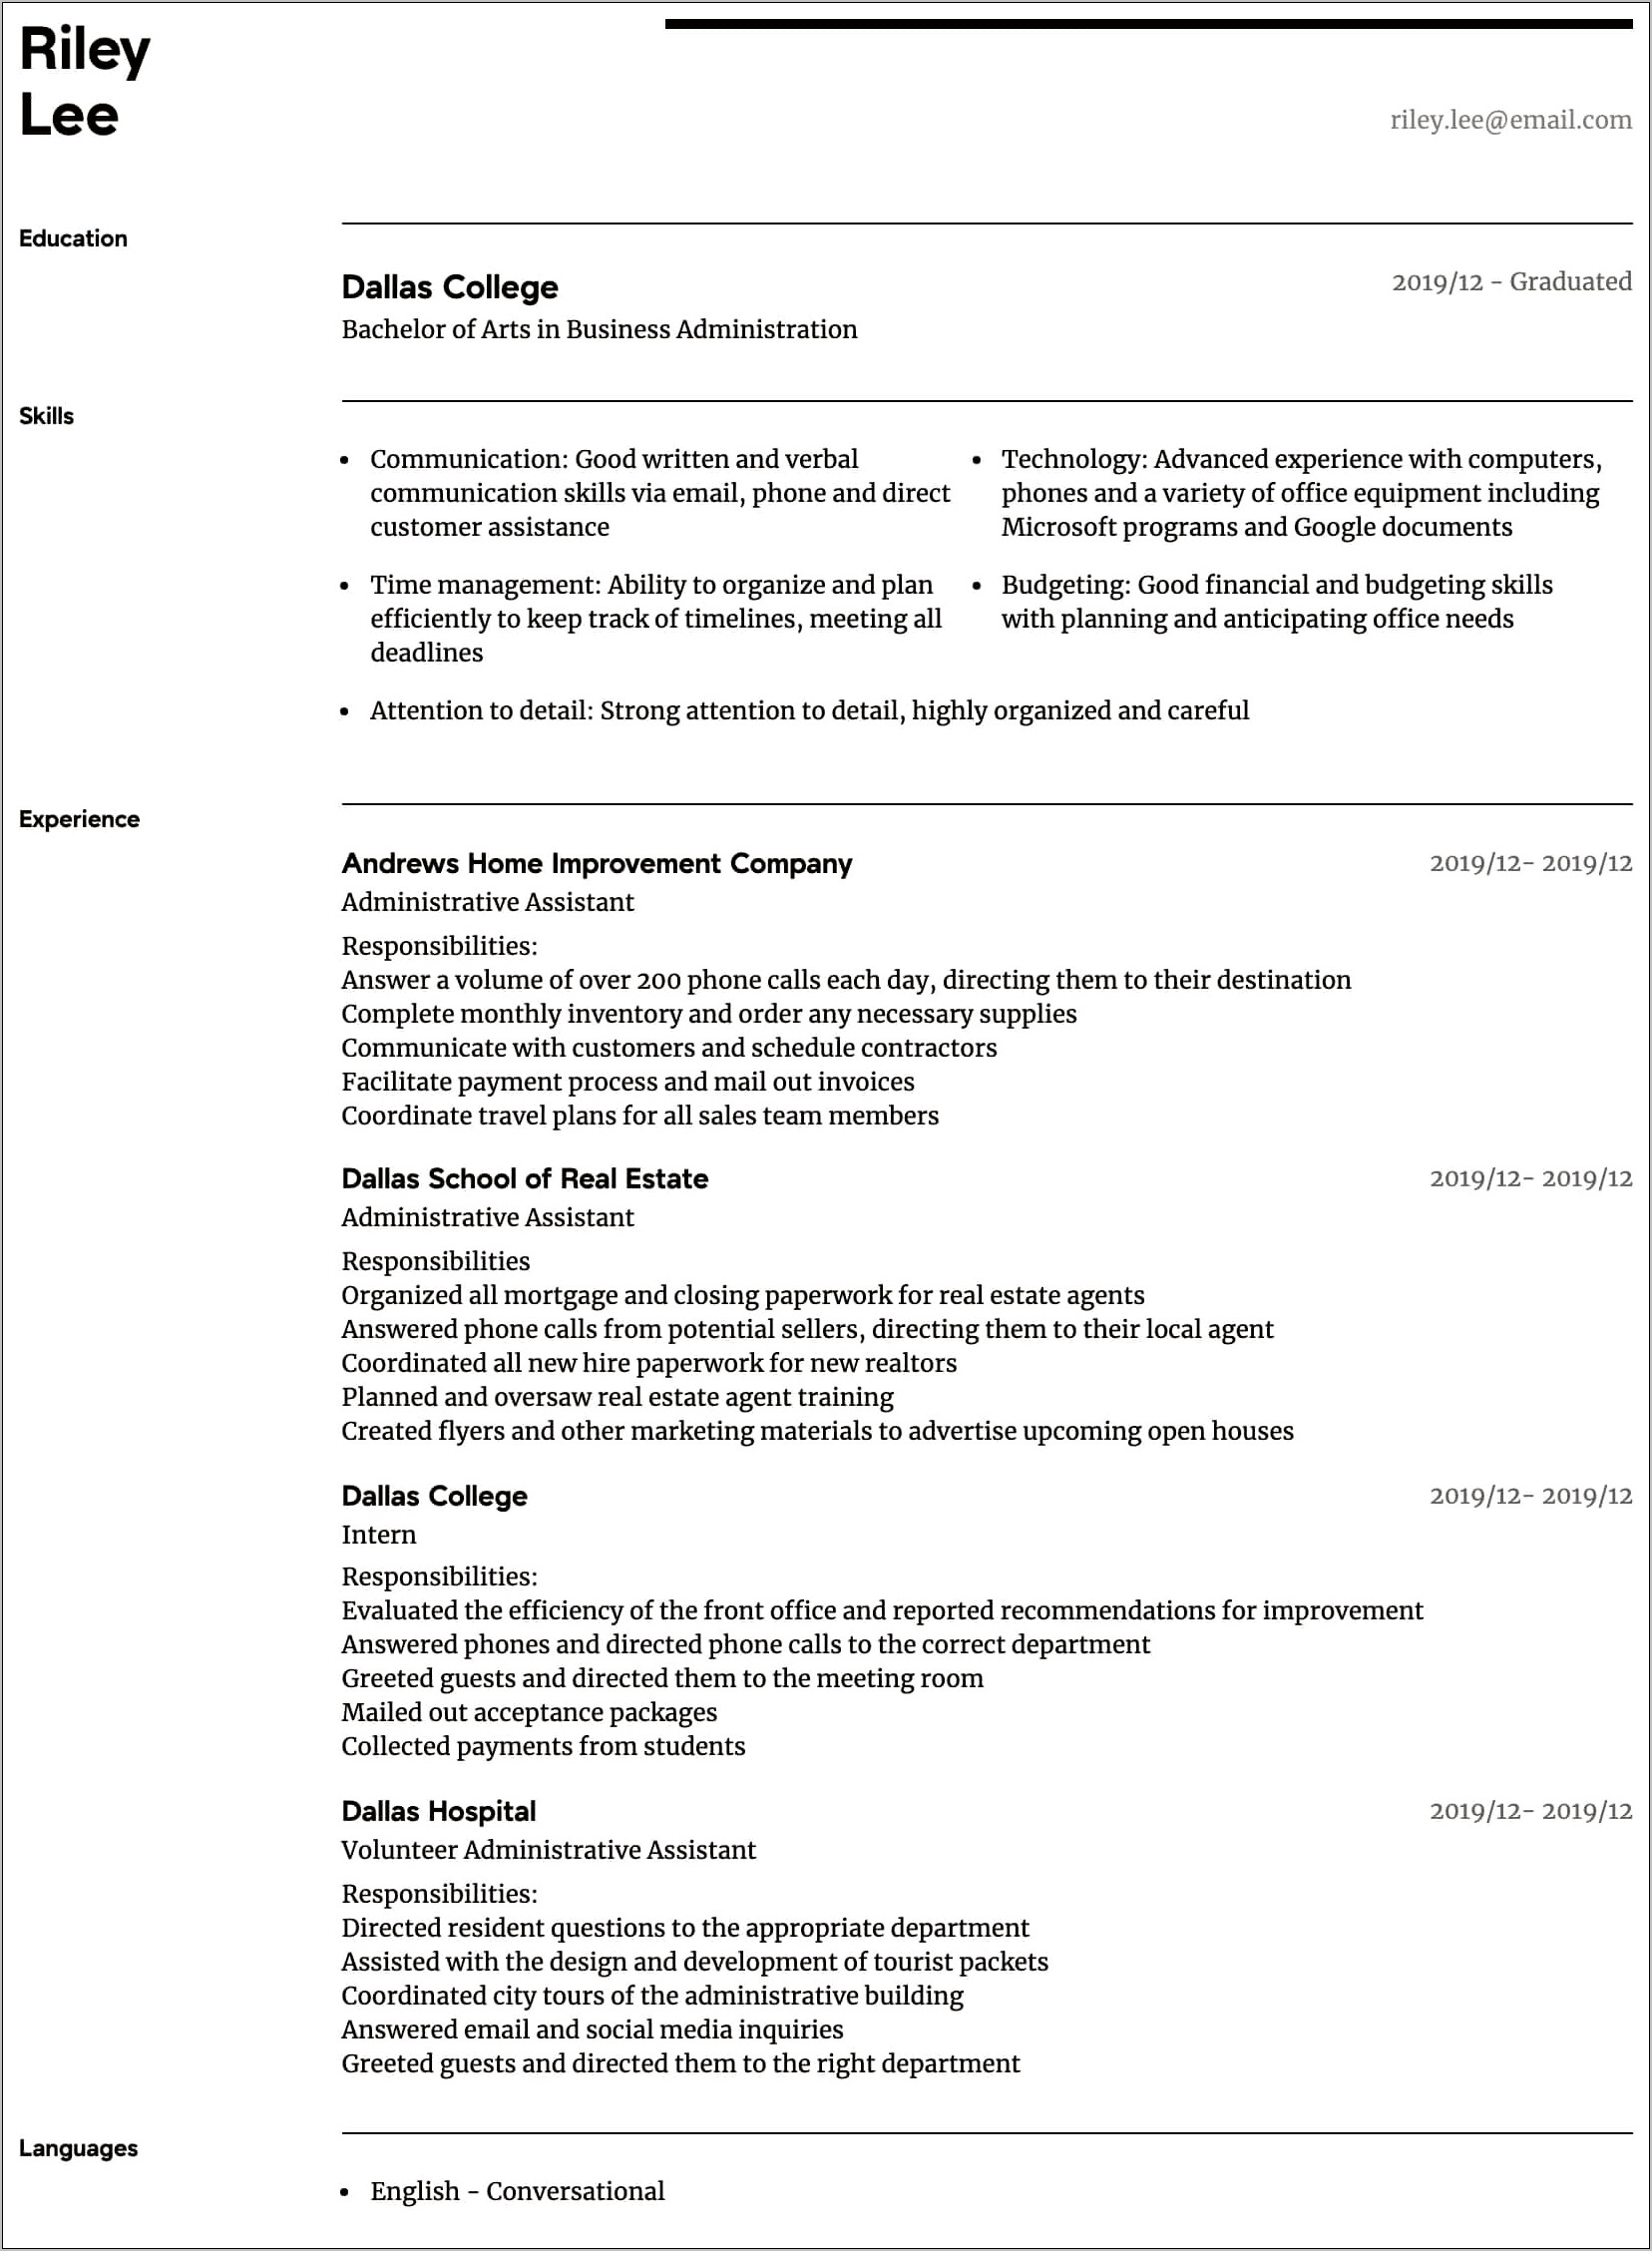 Admin Assistant Job Summary For Resume